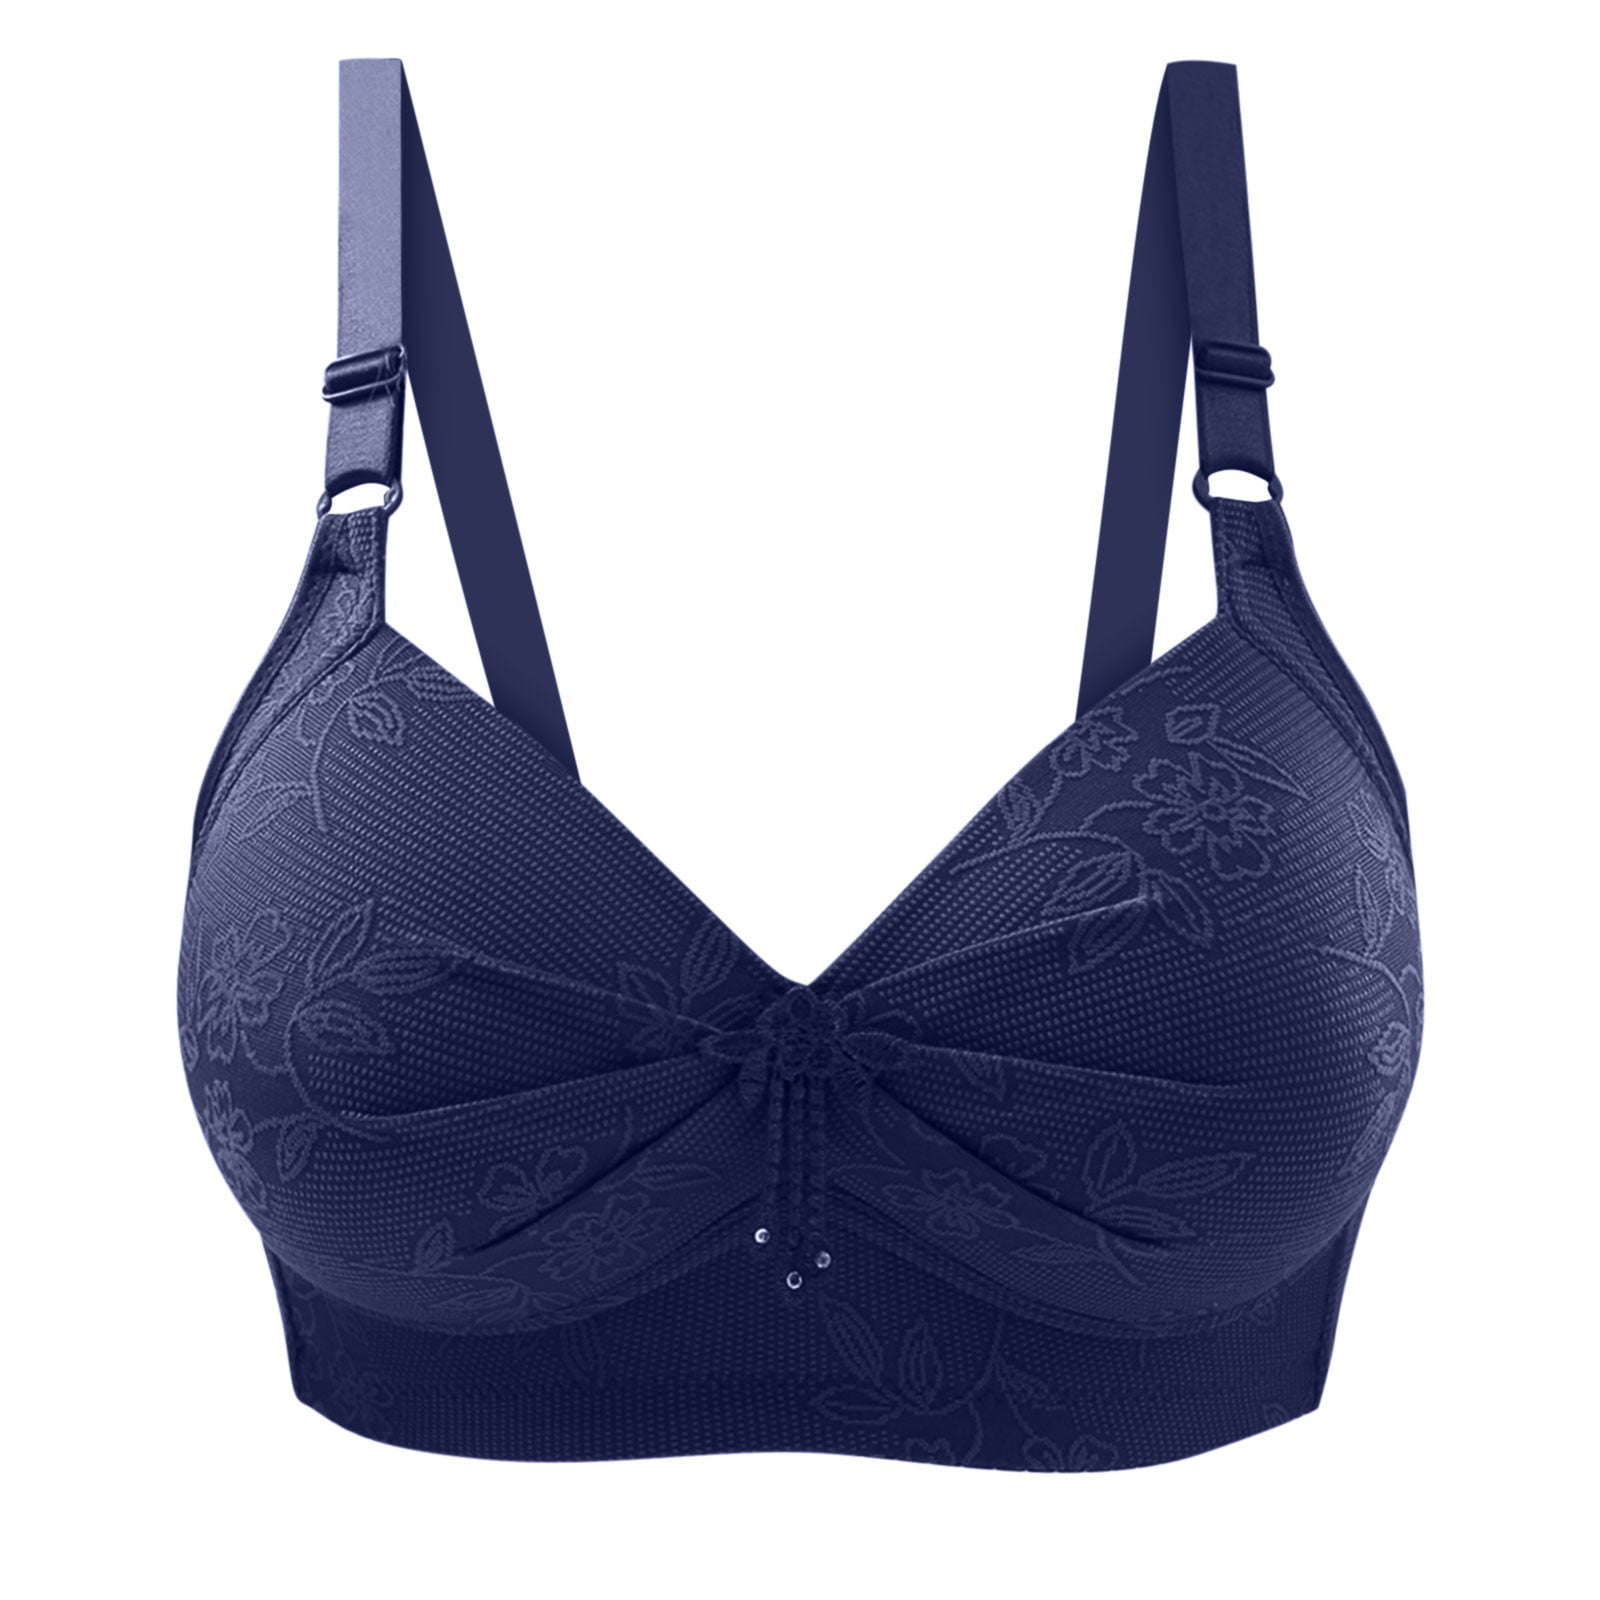 hoksml Wireless Bras with Support and Lift,Woman's Gathered